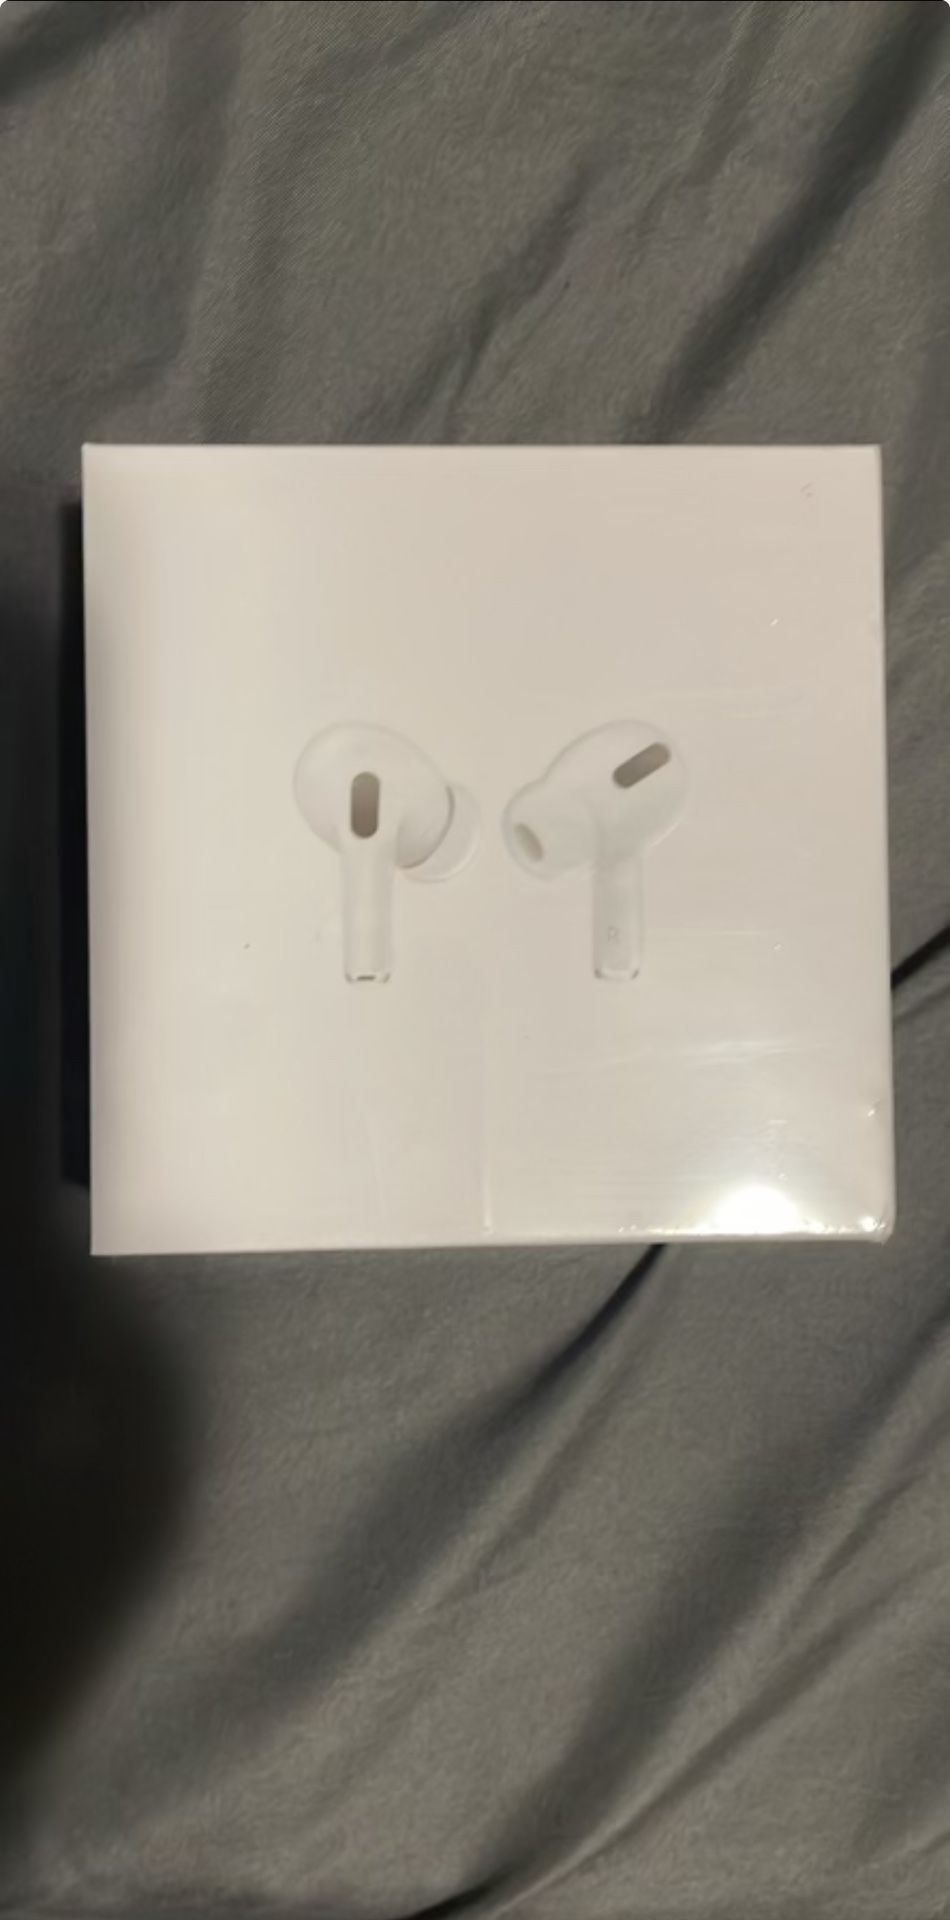 airpods pro’s brand new